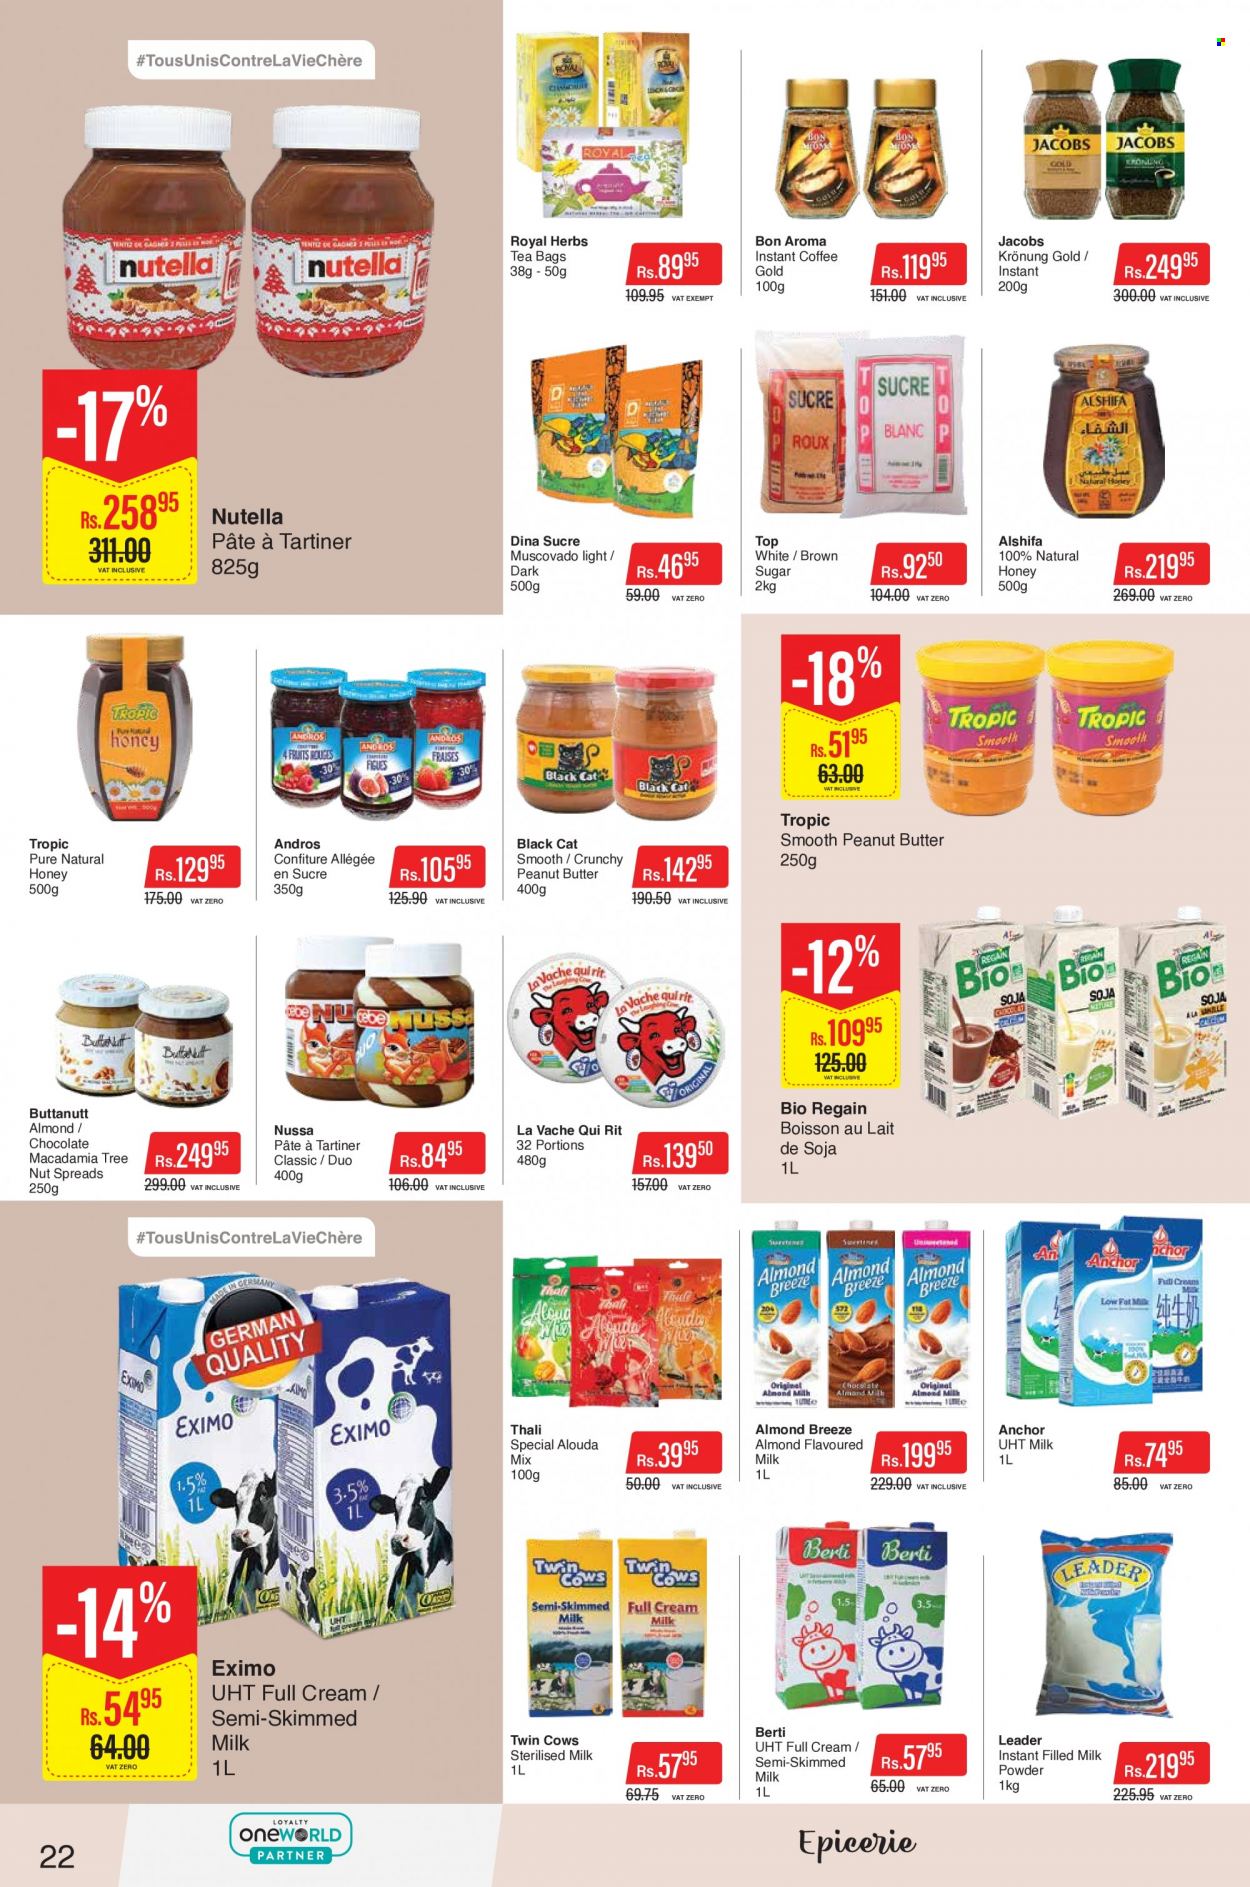 thumbnail - Intermart Catalogue - 23.11.2022 - 20.12.2022 - Sales products - The Laughing Cow, milk, flavoured milk, milk powder, Almond Breeze, Anchor, chocolate, cane sugar, muscovado sugar, herbs, honey, tea bags, instant coffee, Jacobs, Jacobs Krönung, Nutella. Page 22.